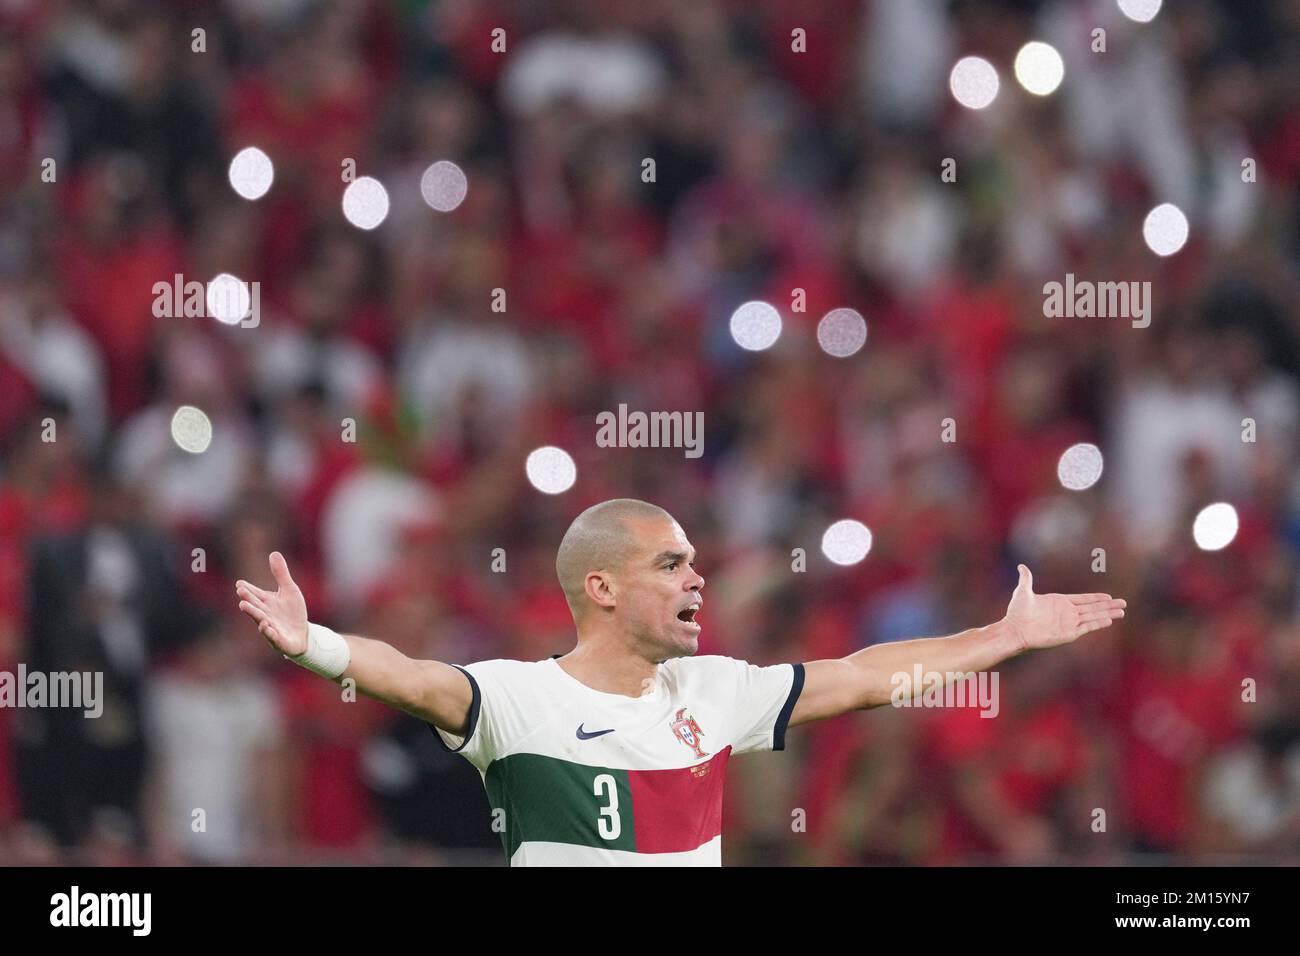 Doha, Qatar. 10th Dec, 2022. Pepe of Portugal reacts during the Quarterfinal between Morocco and Portugal of the 2022 FIFA World Cup at Al Thumama Stadium in Doha, Qatar, Dec. 10, 2022. Credit: Xiao Yijiu/Xinhua/Alamy Live News Stock Photo